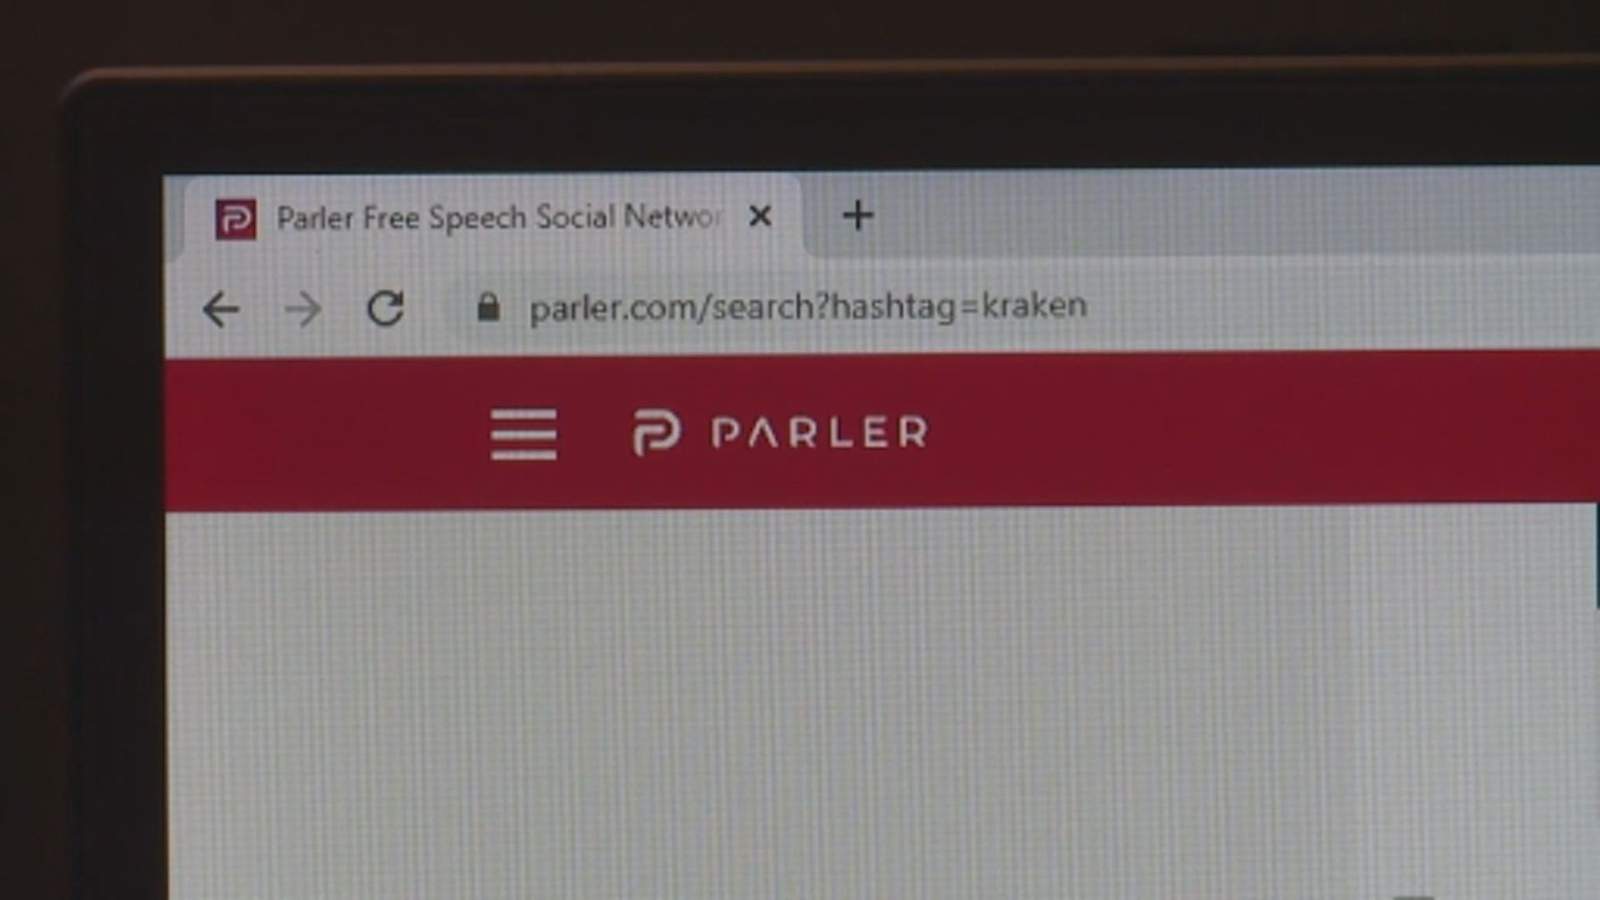 Parler, free speech and the role of big tech